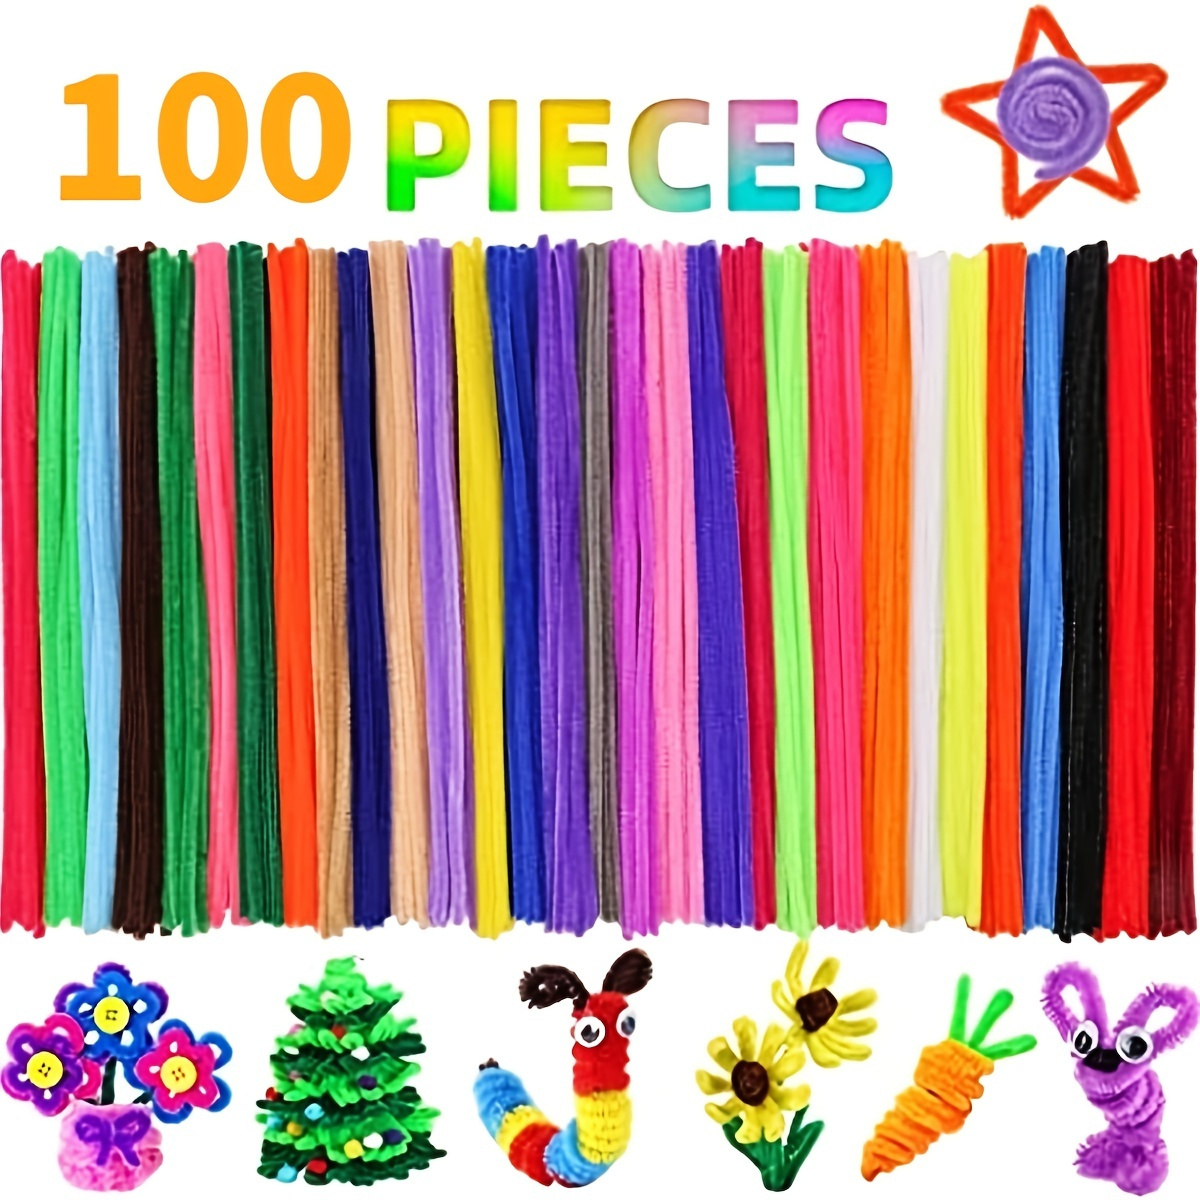 STOBOK 1200 Pcs Color Twist Stick Toy Cleaner Plush Crafts for Kids Craft  Supplies for Kids Assorted Pipe Cleaners Fluffy Pipe Cleaner Pipe Cleaners